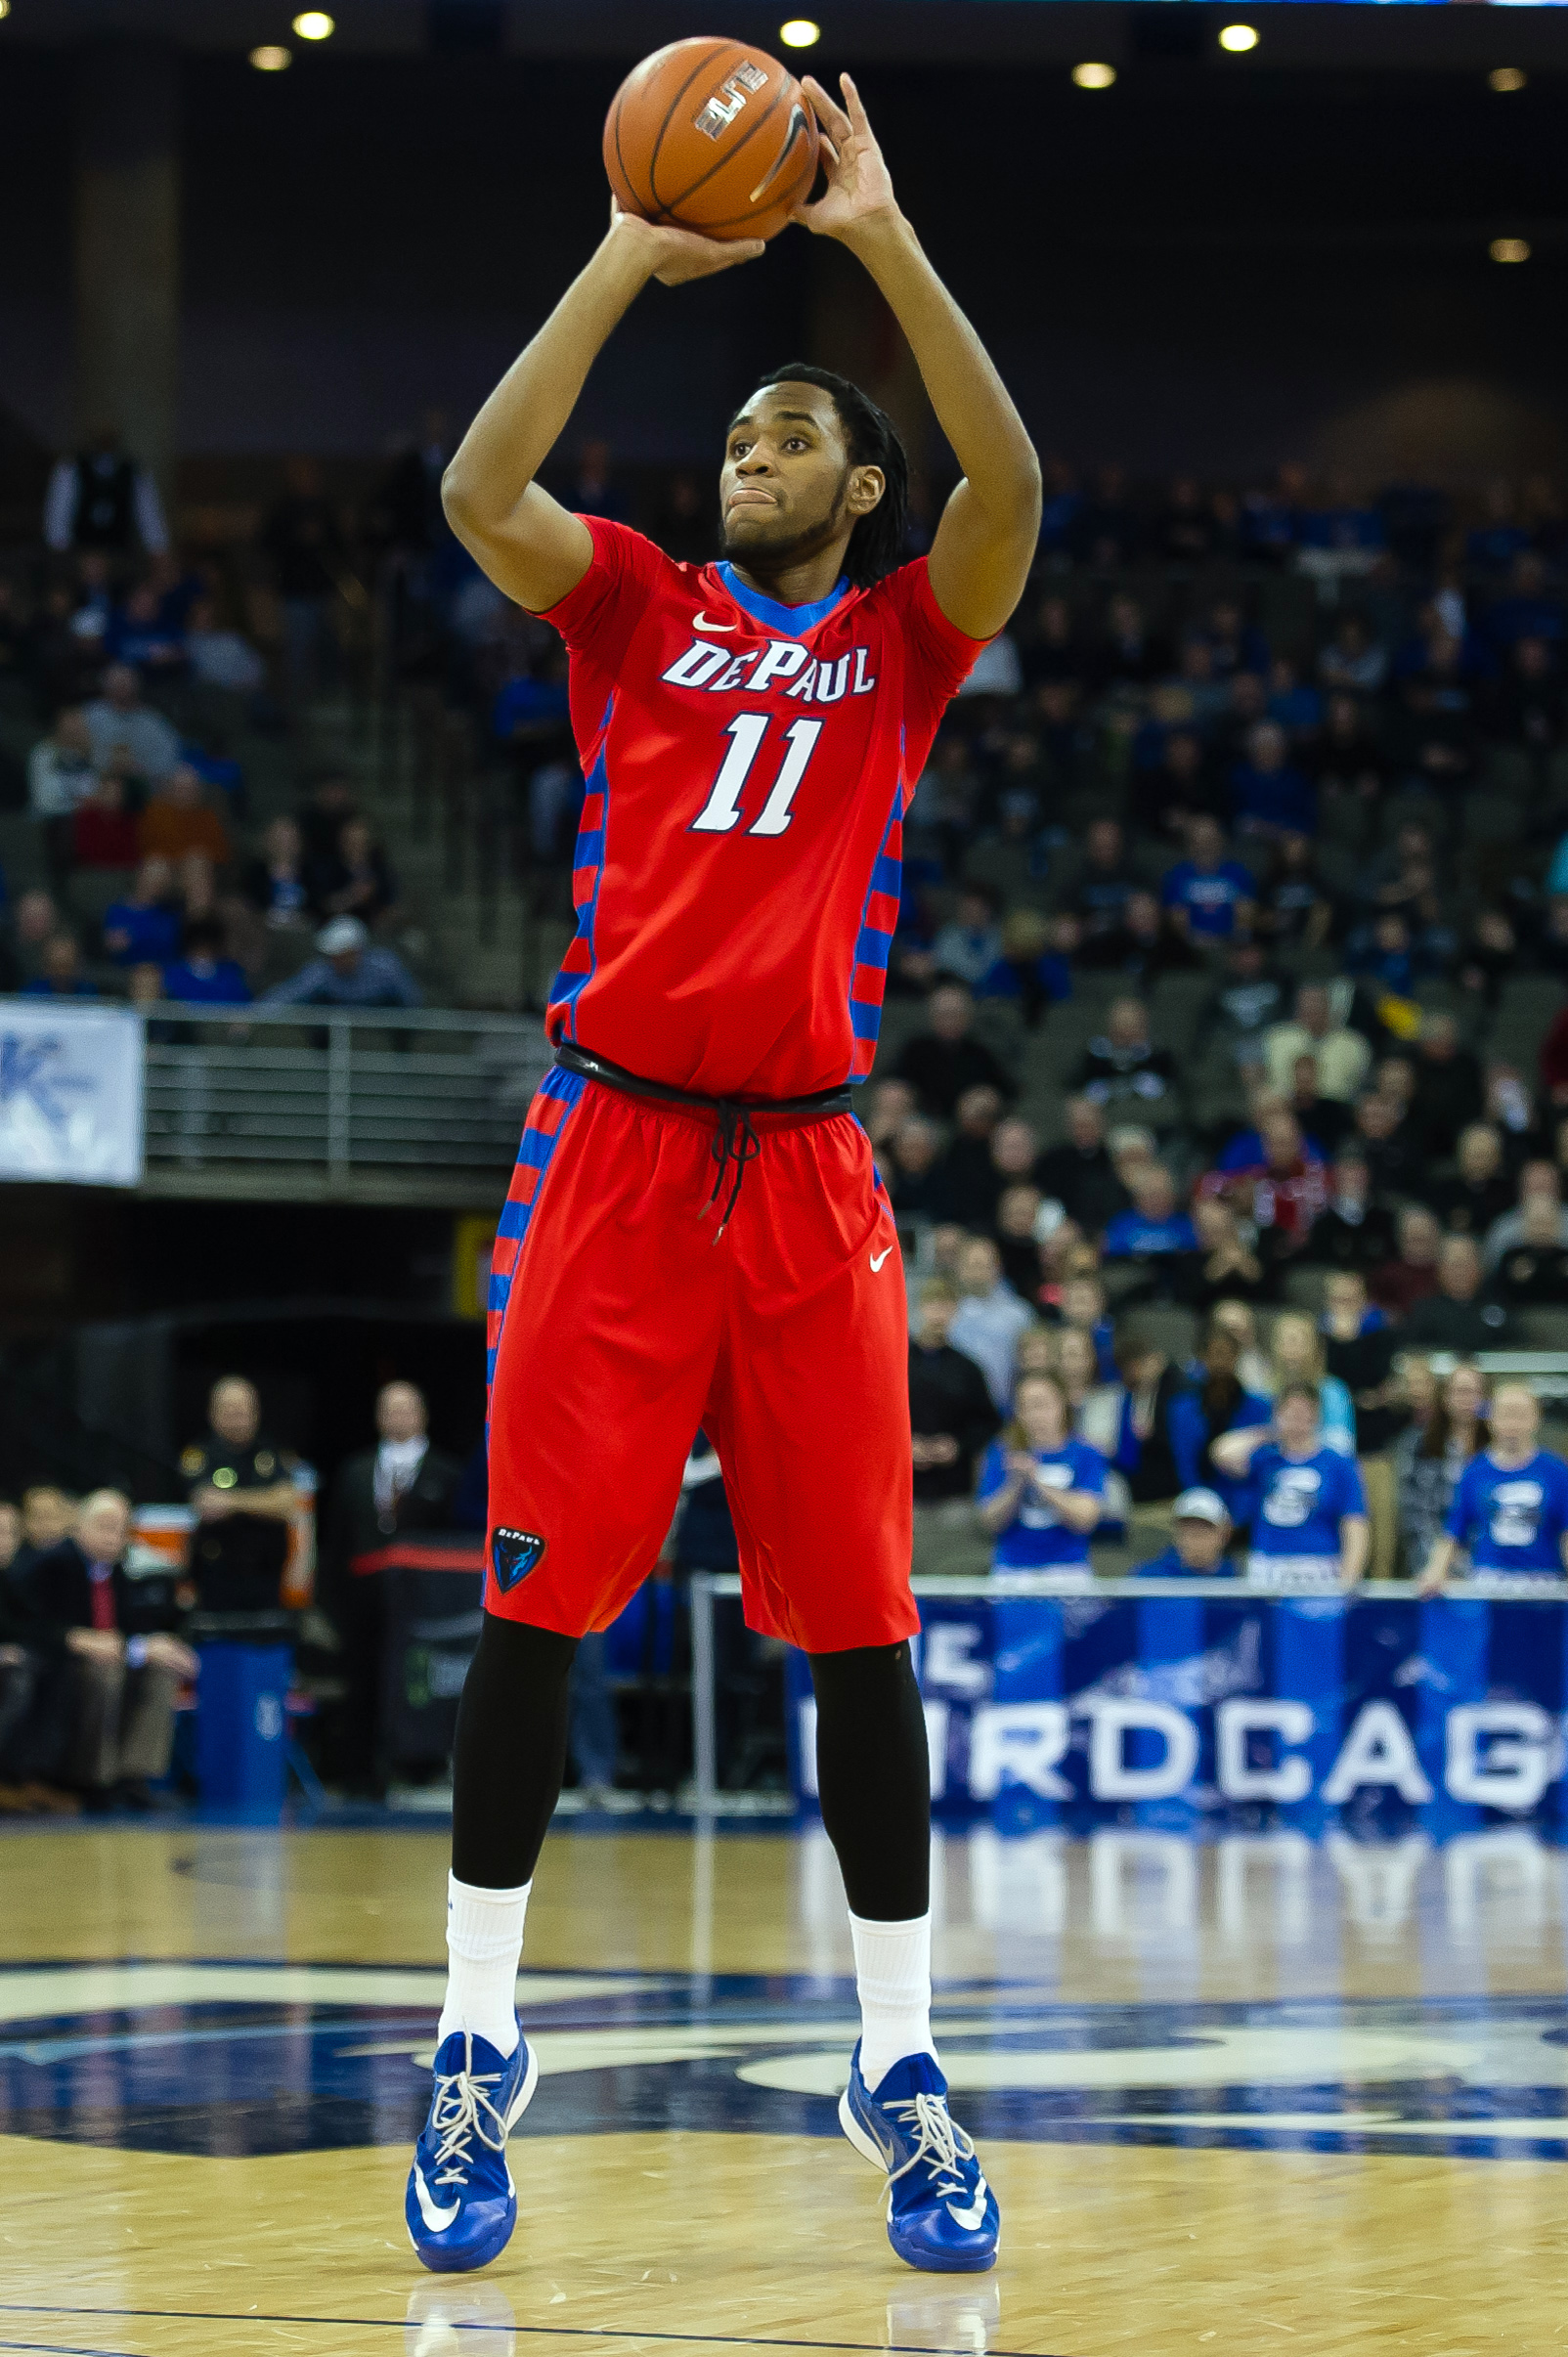 Forrest Robinson and DePaul lead the Big East...of course/